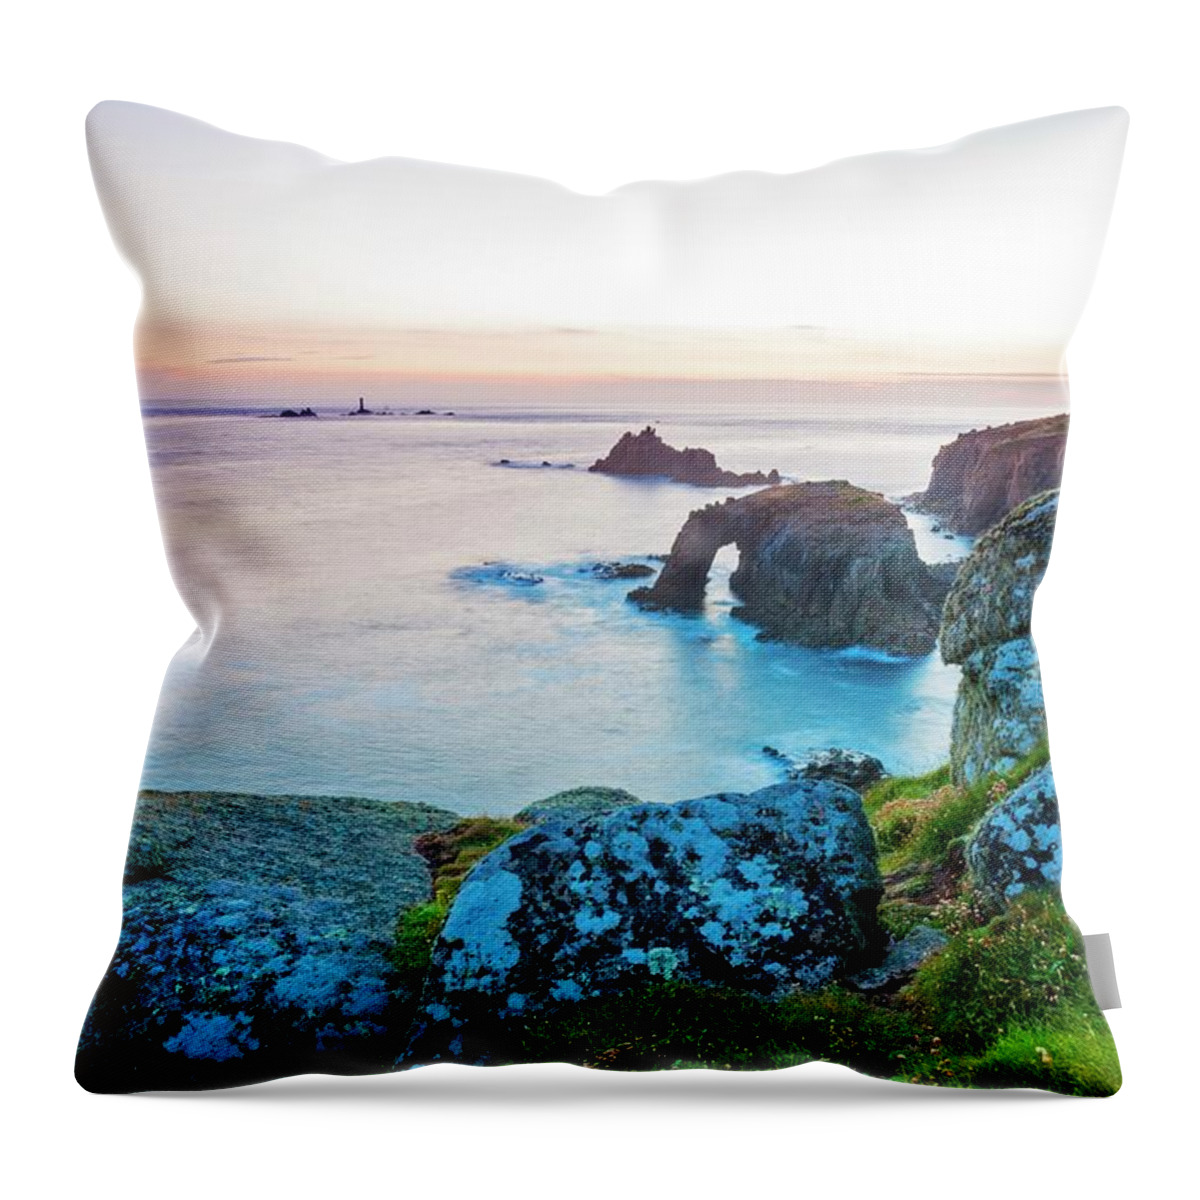 Estock Throw Pillow featuring the digital art Arch & Rock Formations by Jordan Banks